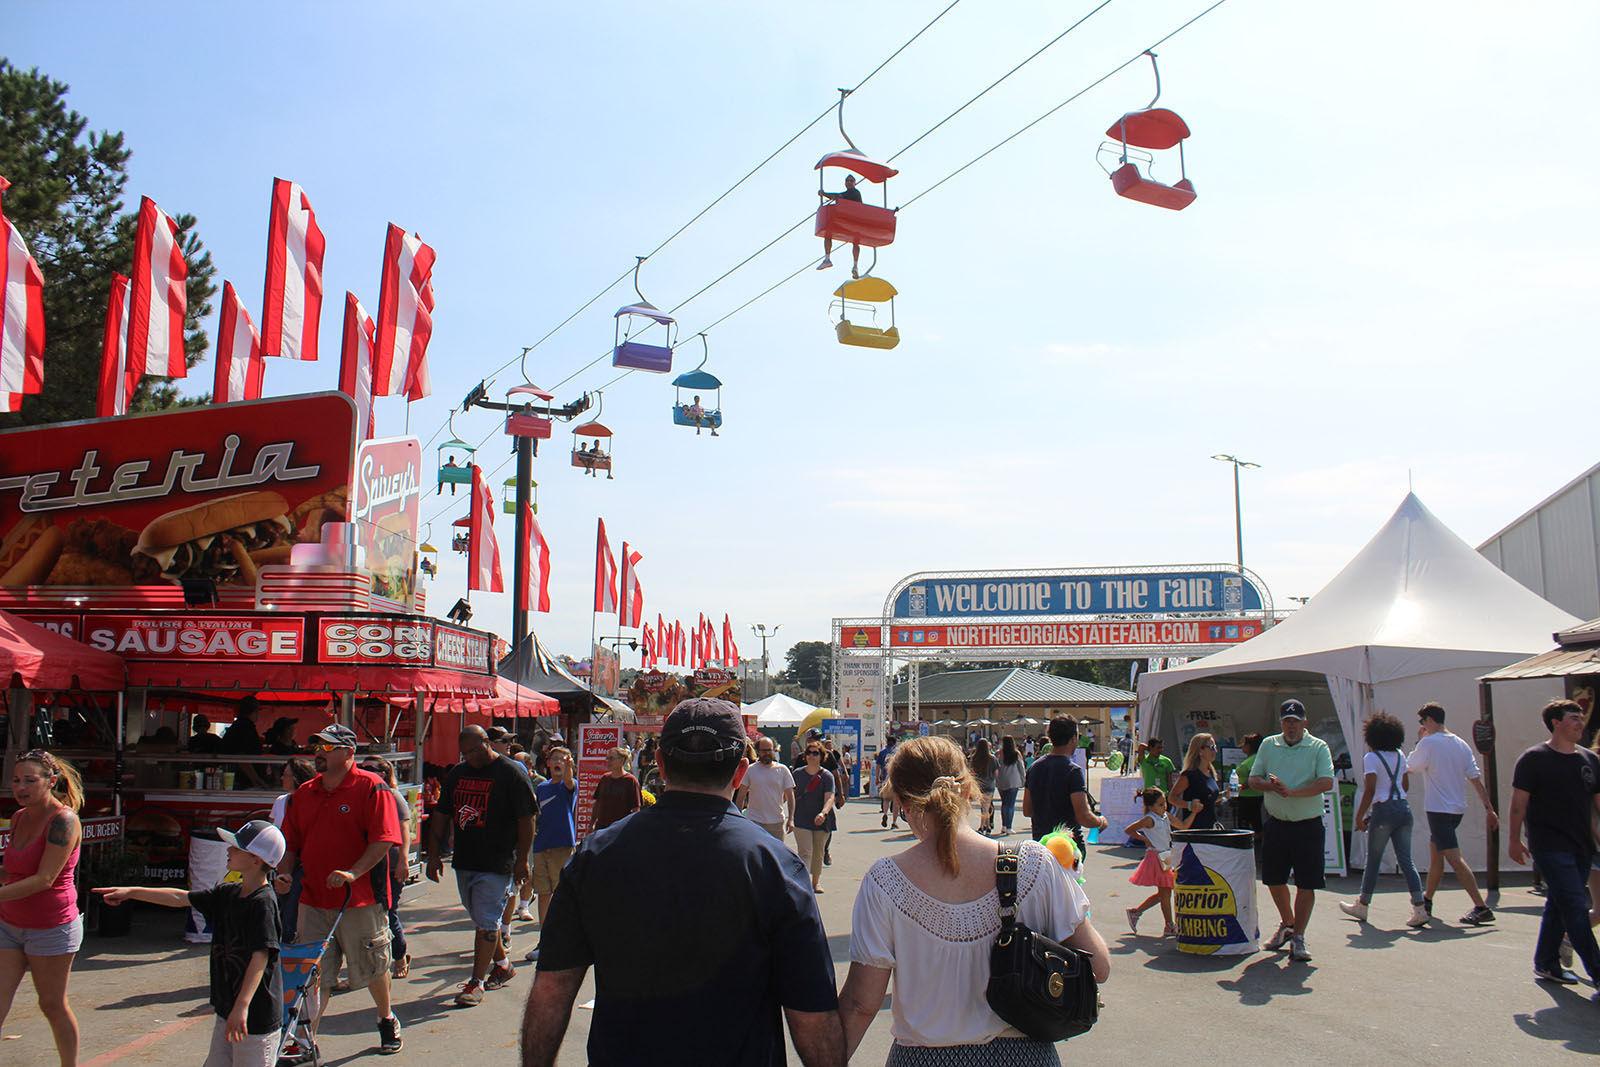 Ride, eat, repeat at the North State Fair starting Thursday